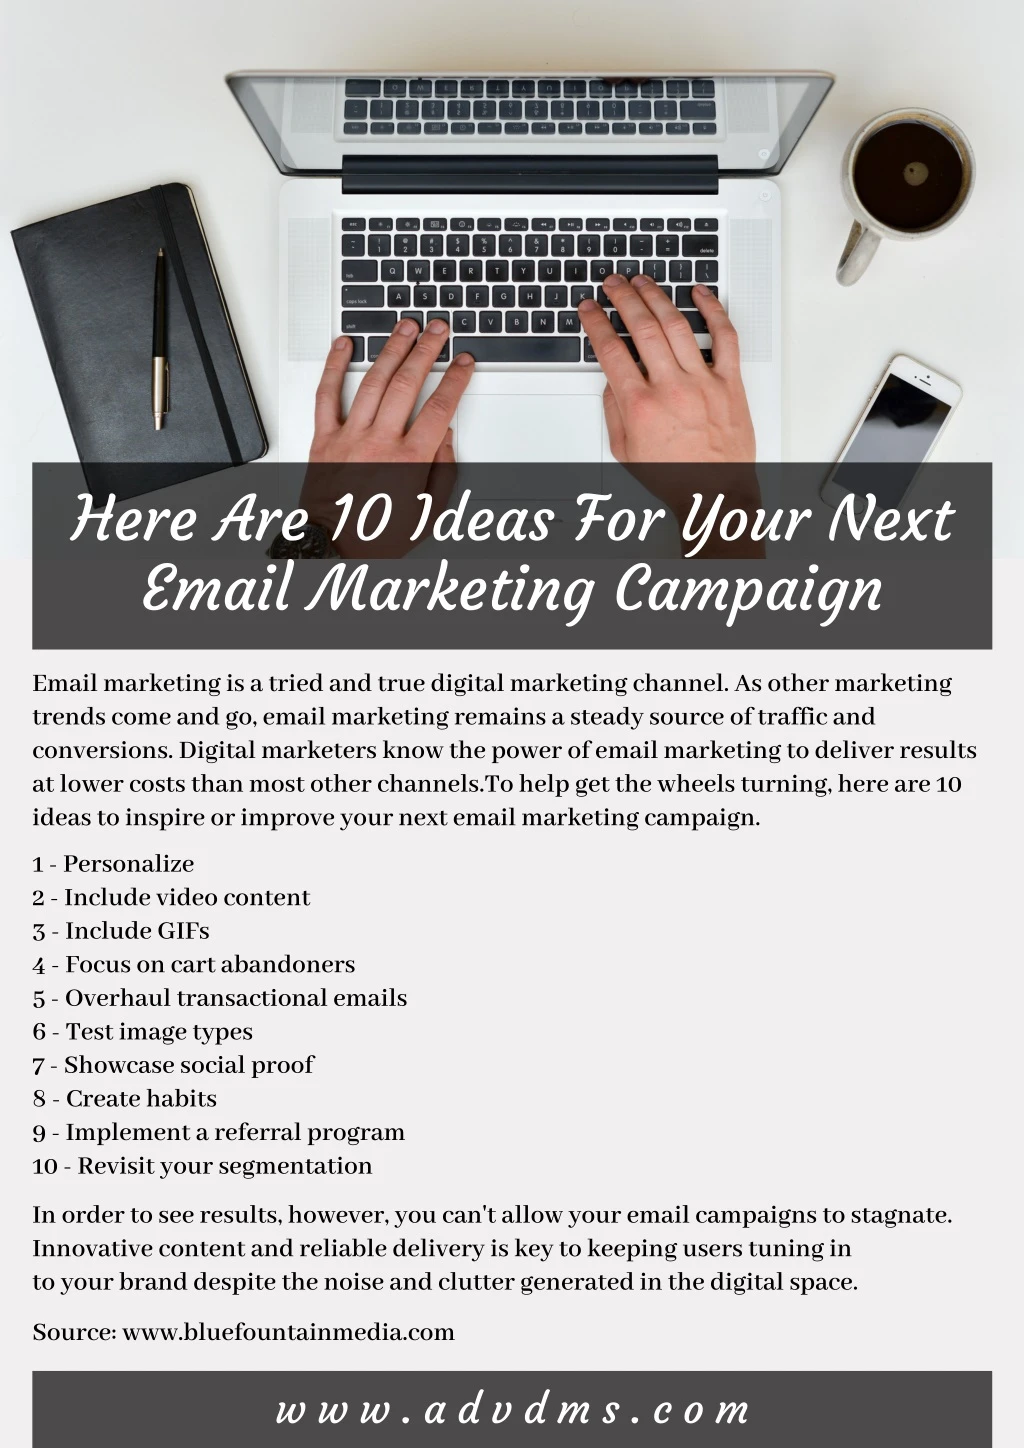 here are 10 ideas for your next email marketing